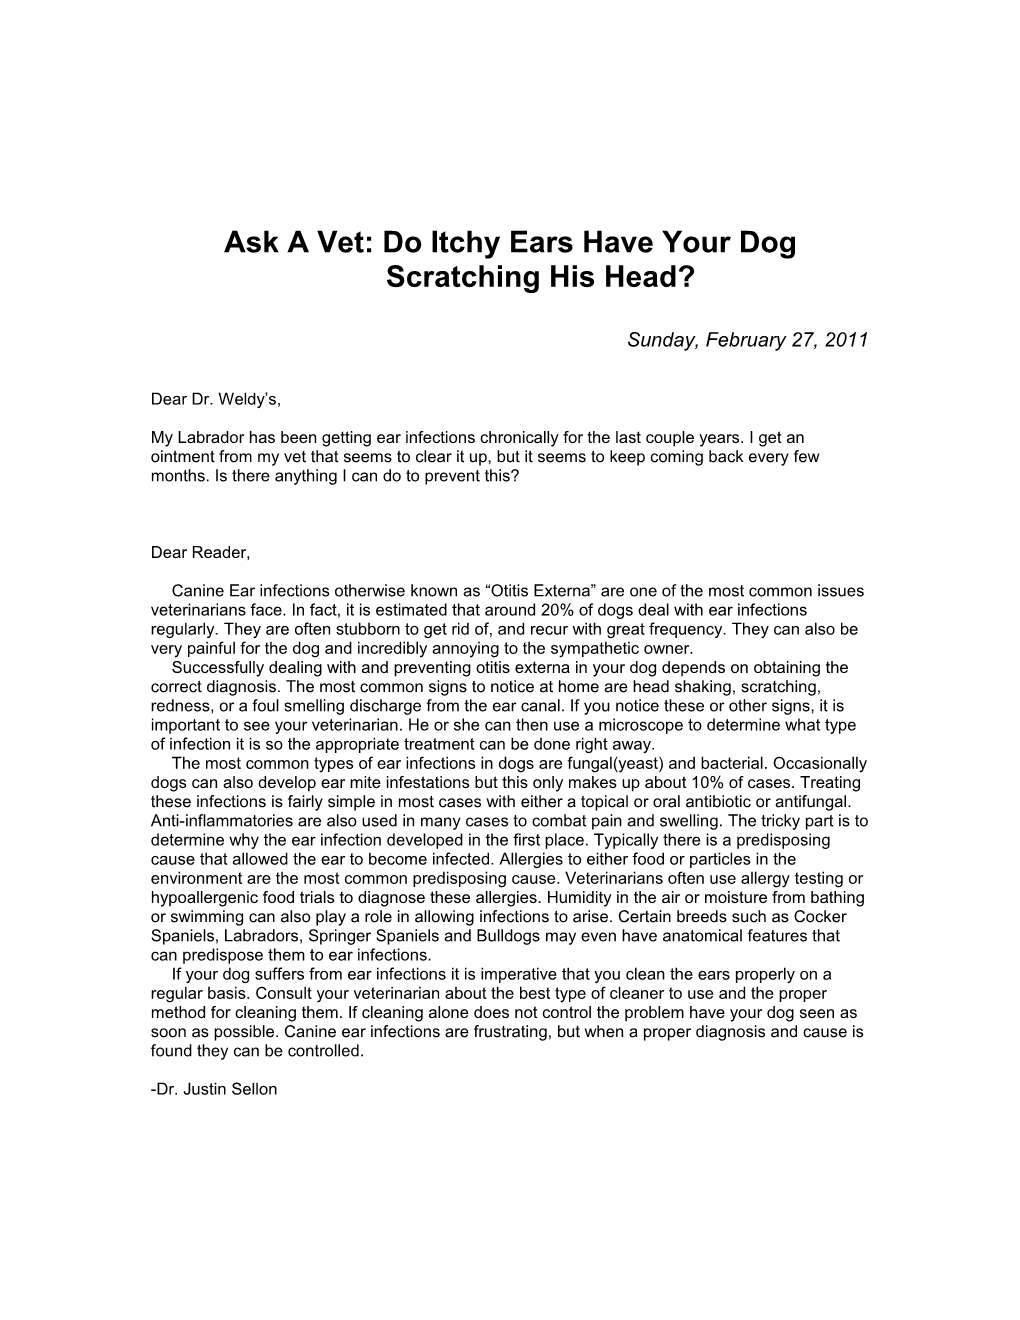 Ask a Vet: Do Itchy Ears Have Your Dog Scratching His Head